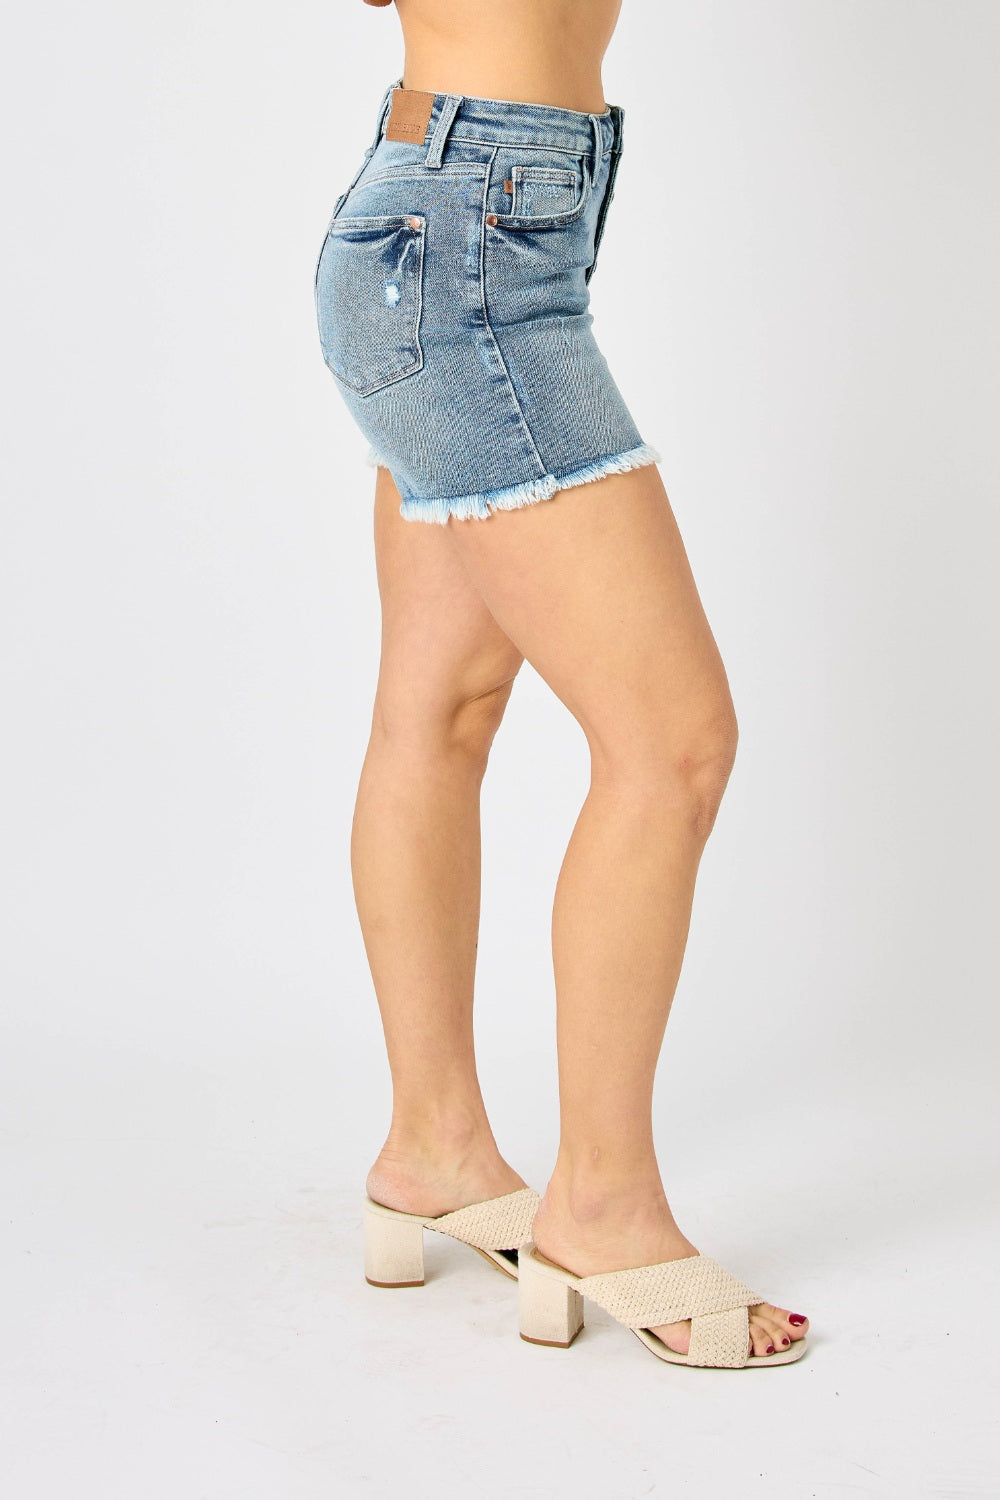 Judy Blue Full Size Button Fly Raw Hem Denim Shorts Southern Soul Collectives